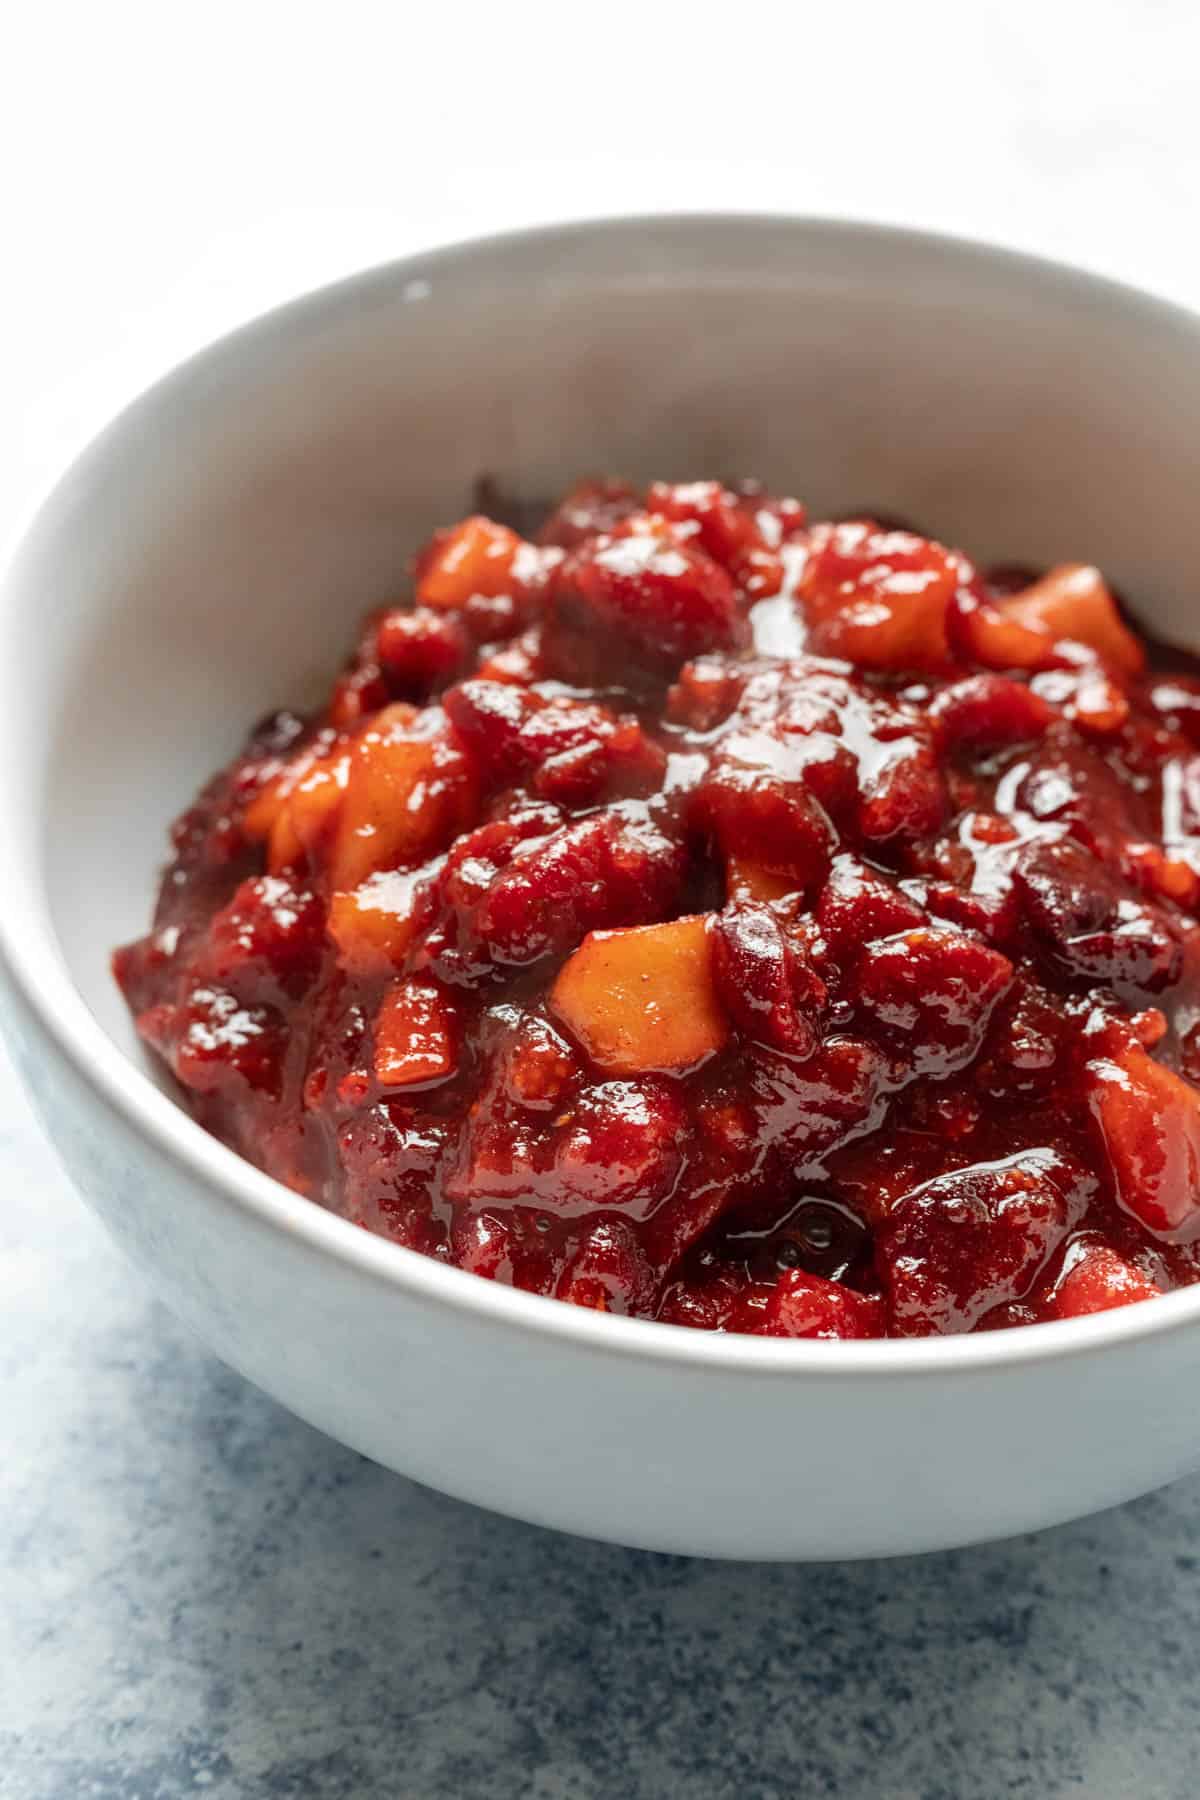 chunky fruit compote in a white bowl on a blue countertop.